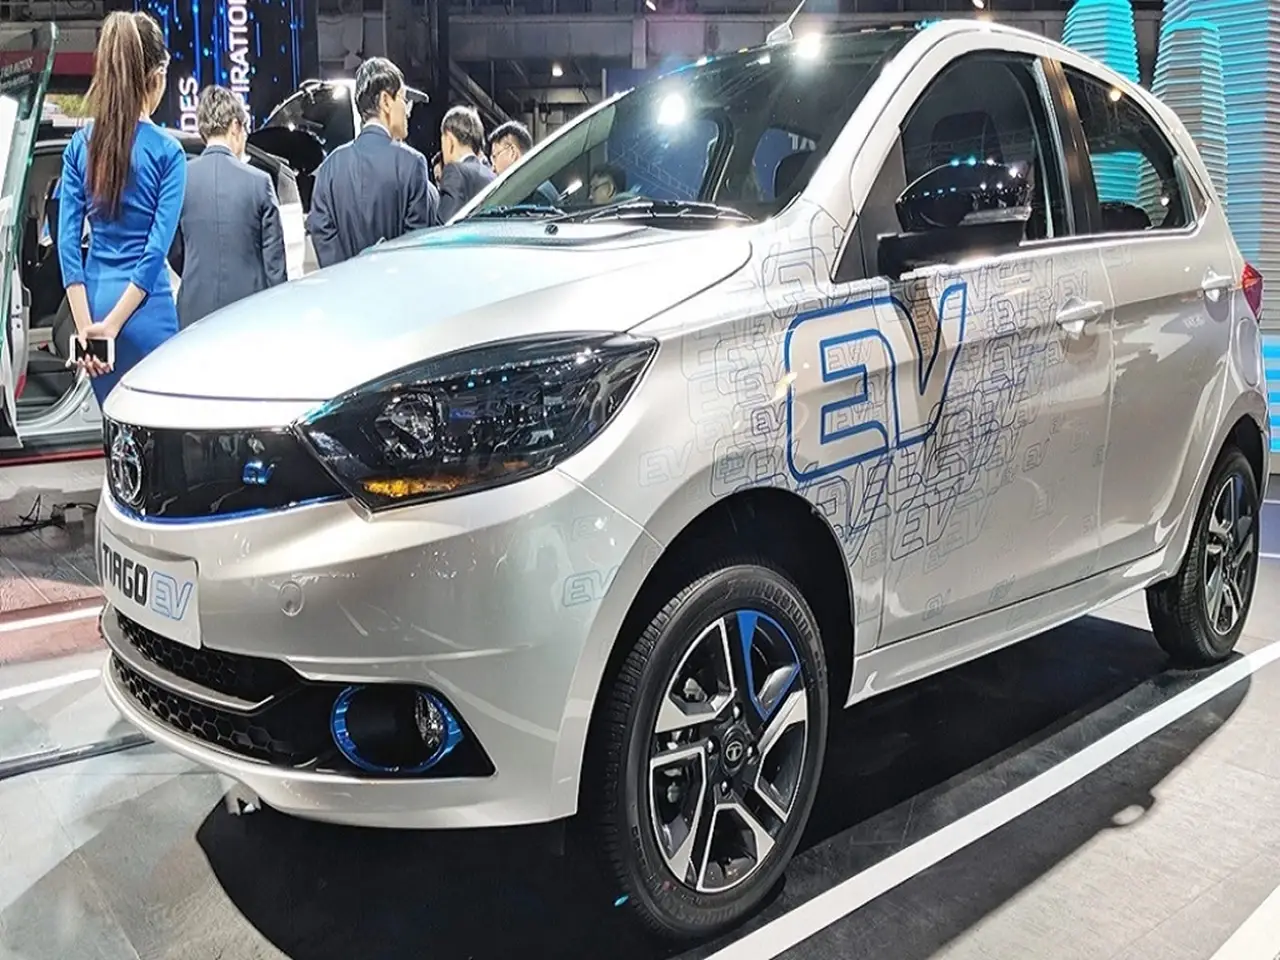 Tata offers two different battery packs for the Tiago EV.